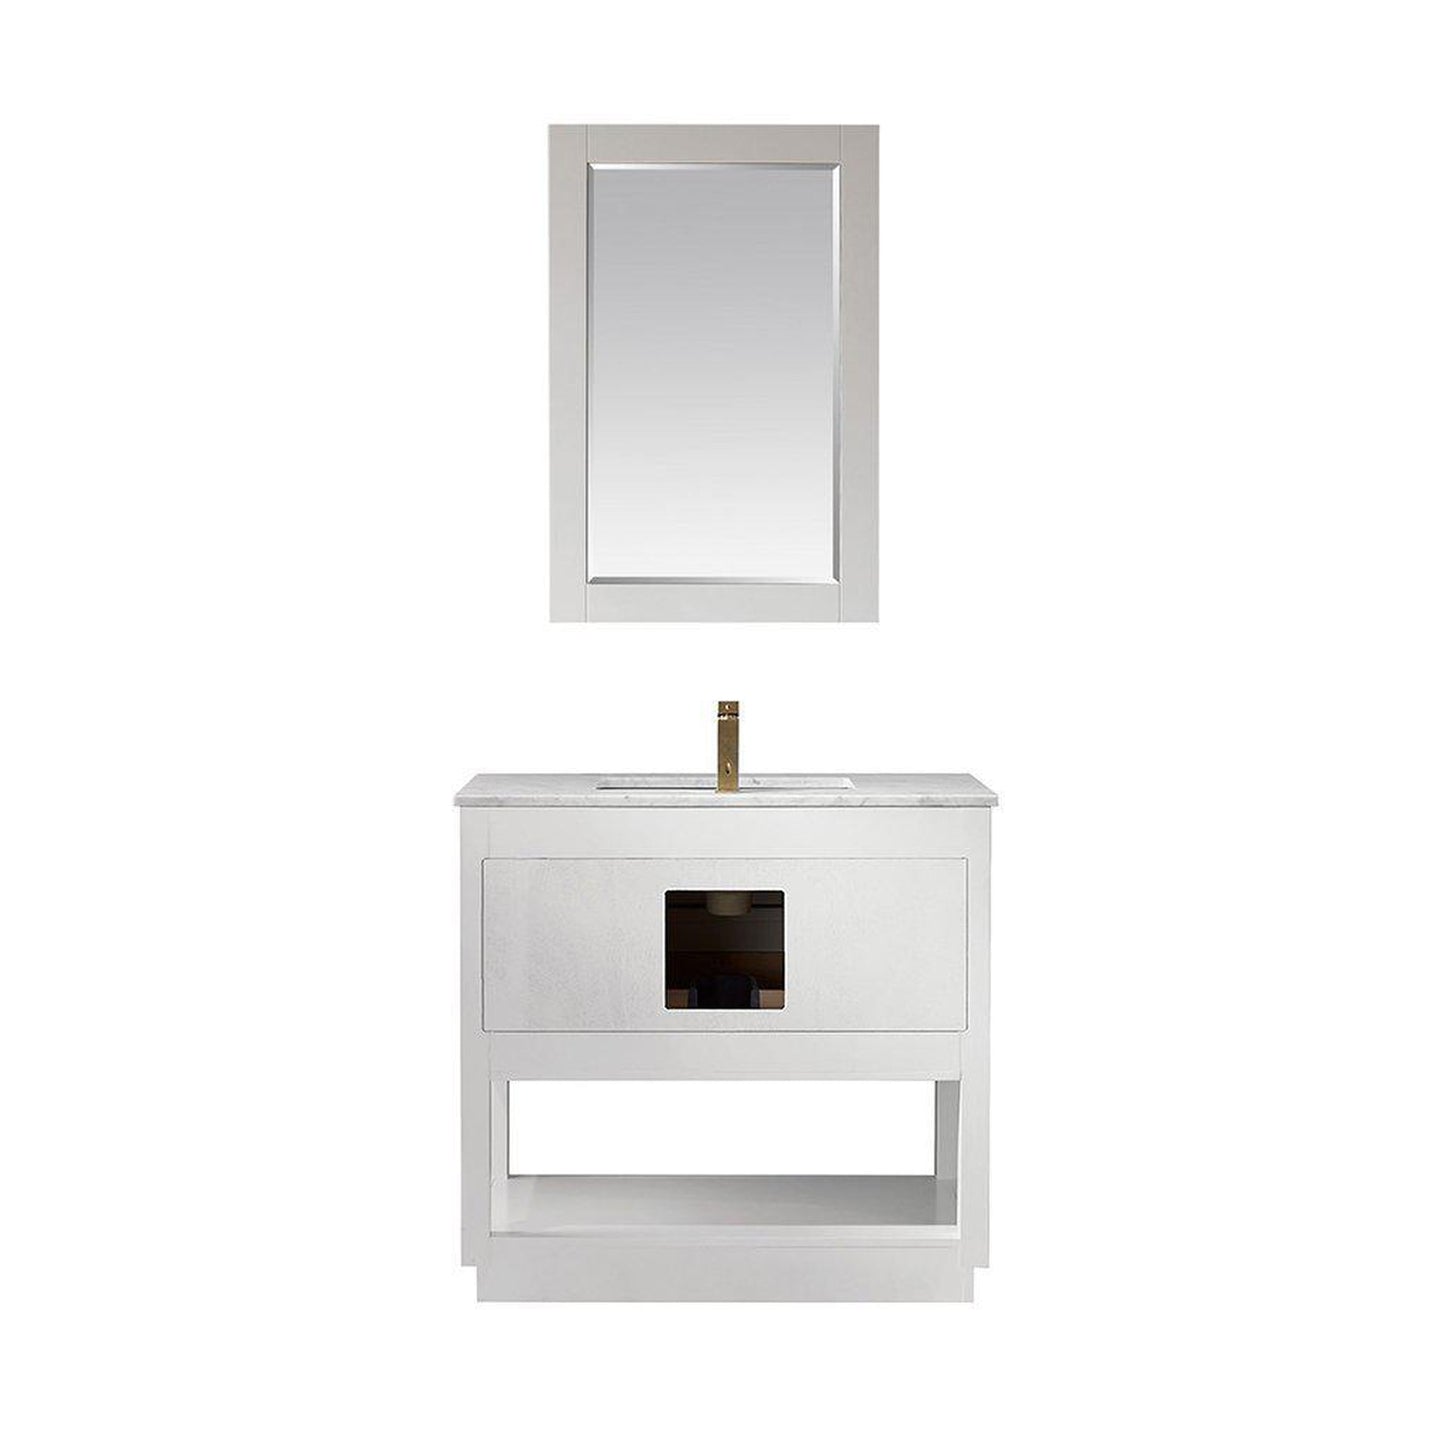 Altair Remi 36" Single White Freestanding Bathroom Vanity Set With Mirror, Natural Carrara White Marble Top, Rectangular Undermount Ceramic Sink, and Overflow